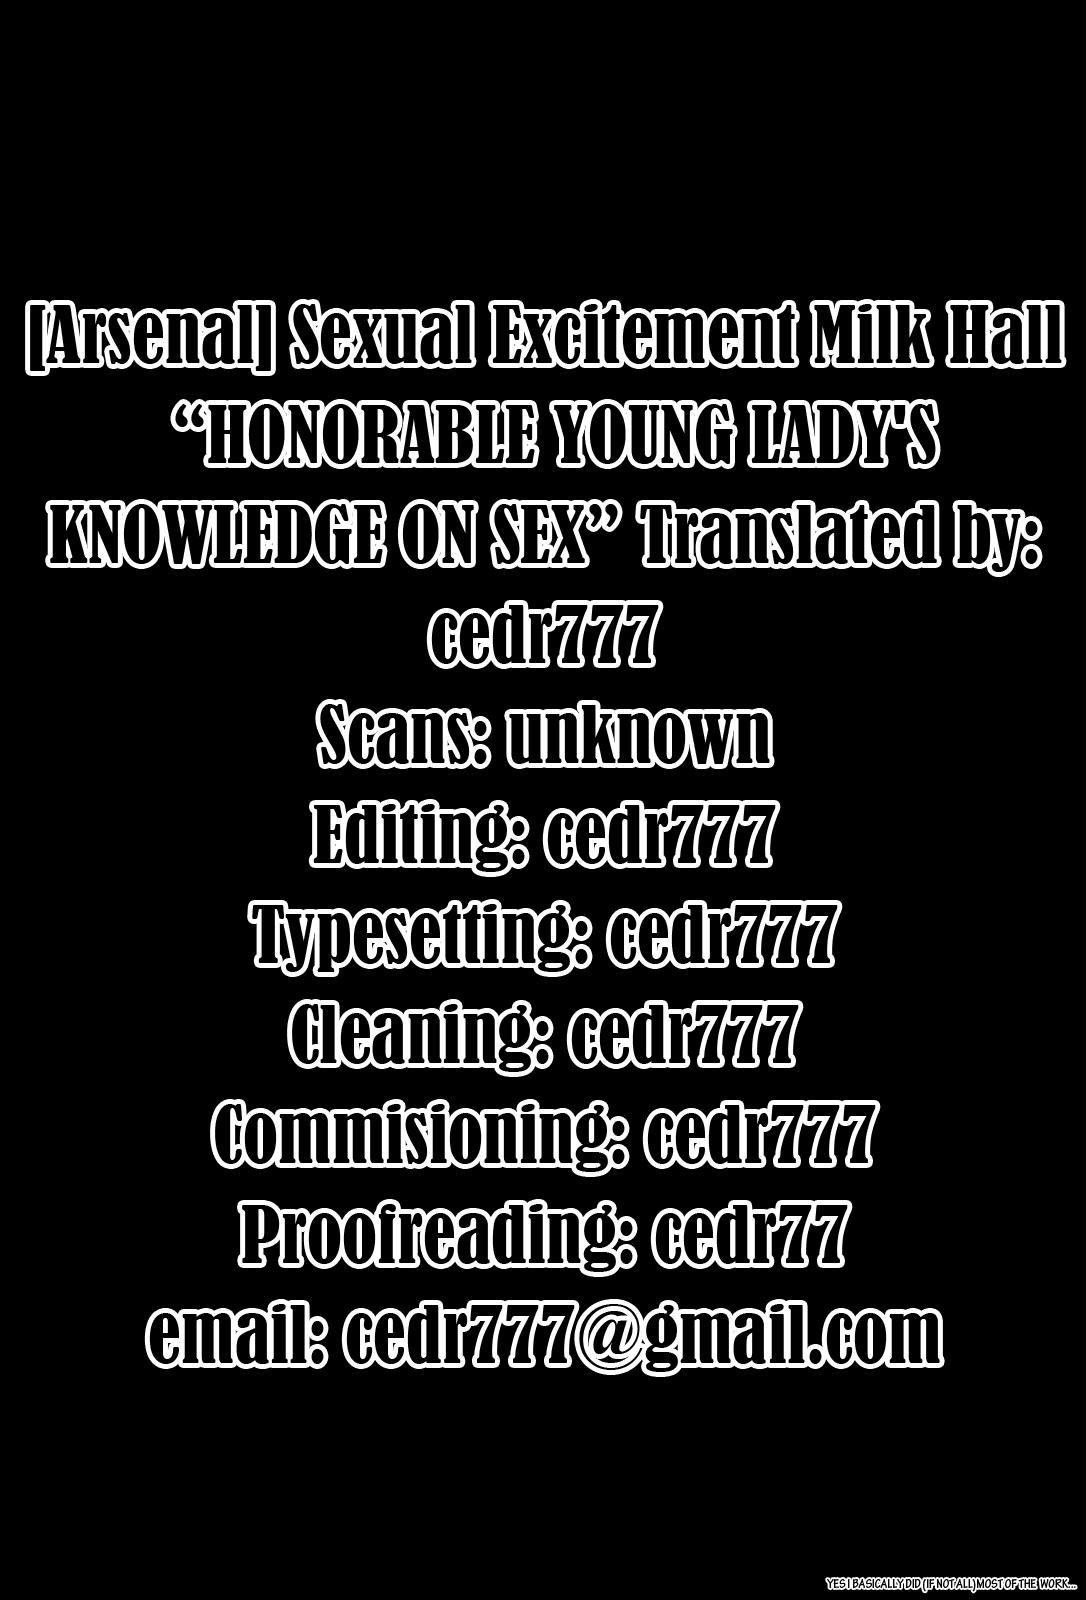 Amatur Porn Sexual Excitement Milk Hall - Honorable Young Lady's Knowledge On Sex Guys - Page 19